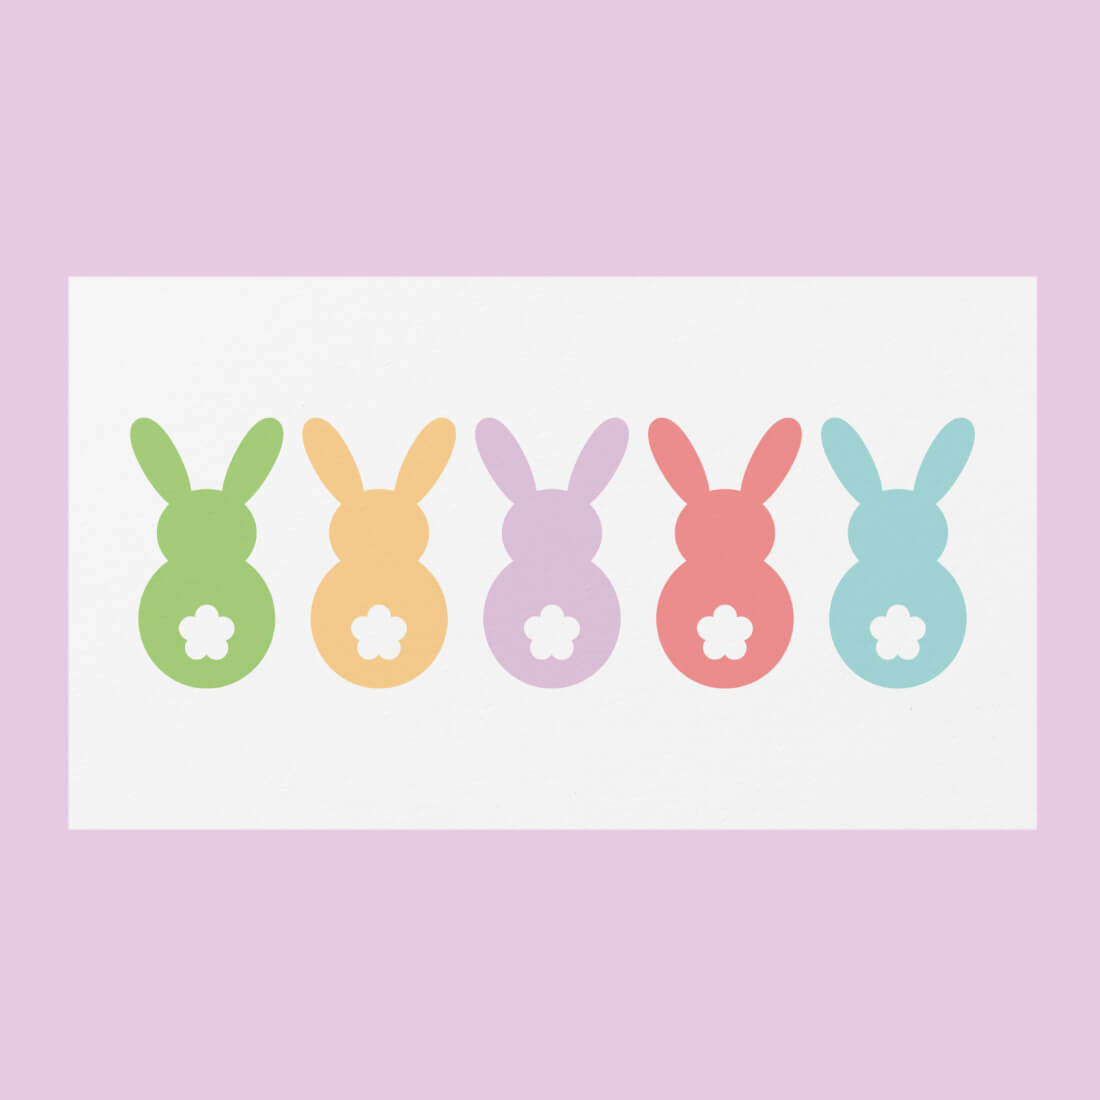 Pastel rabbits with white tails.